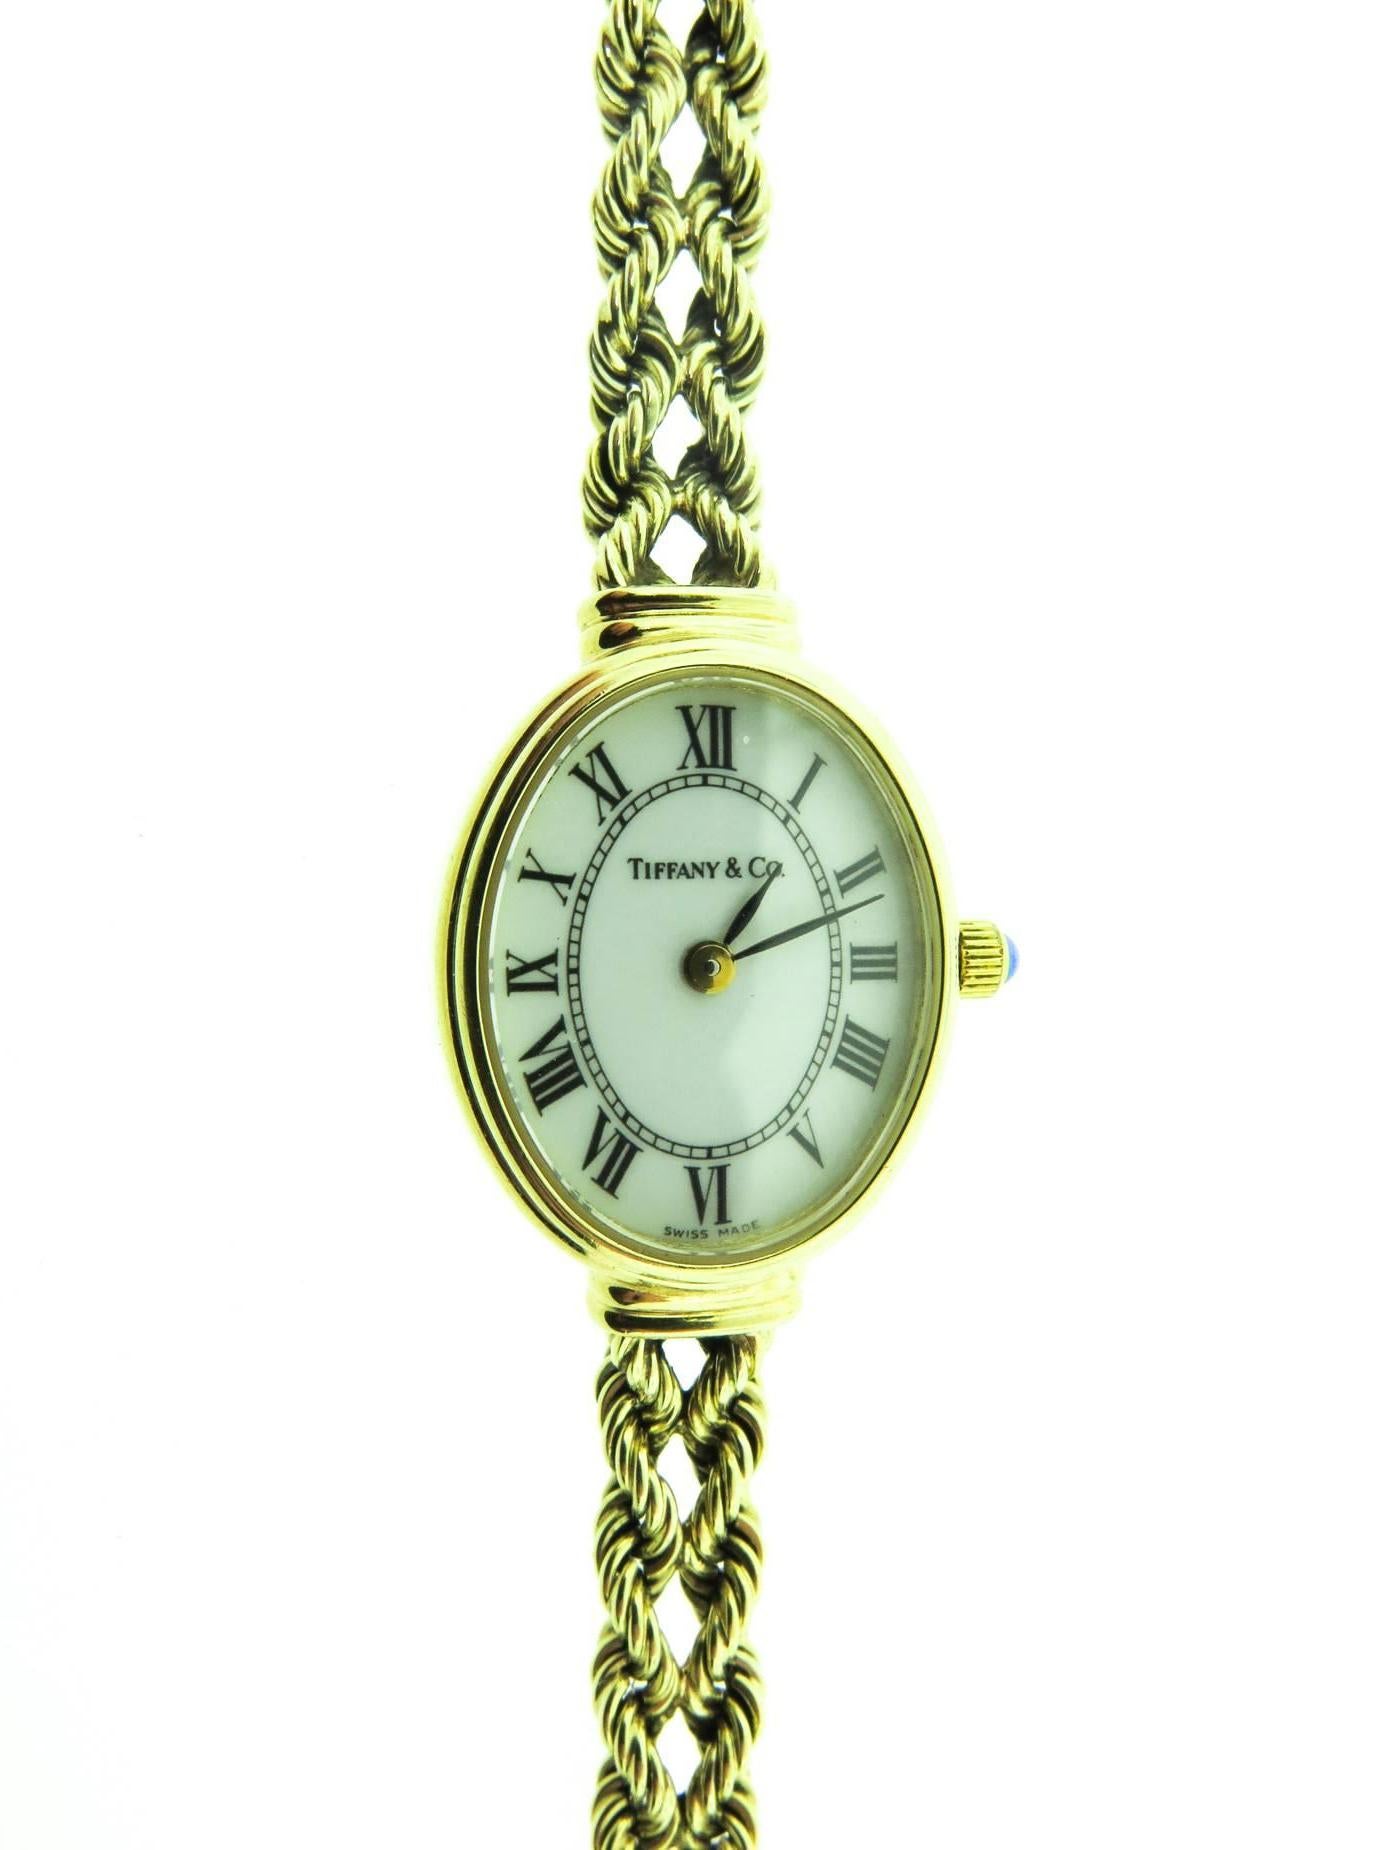 Tiffany & Co. Solid 14k solid yellow gold watch, in excellent running condition. 
Case Length x Width: 27.50mm x 24.75mm (with crown). Case Thickness: 4.70mm. White dial with Black Roman Numeral Hour Markers. Additional rope piece (part of